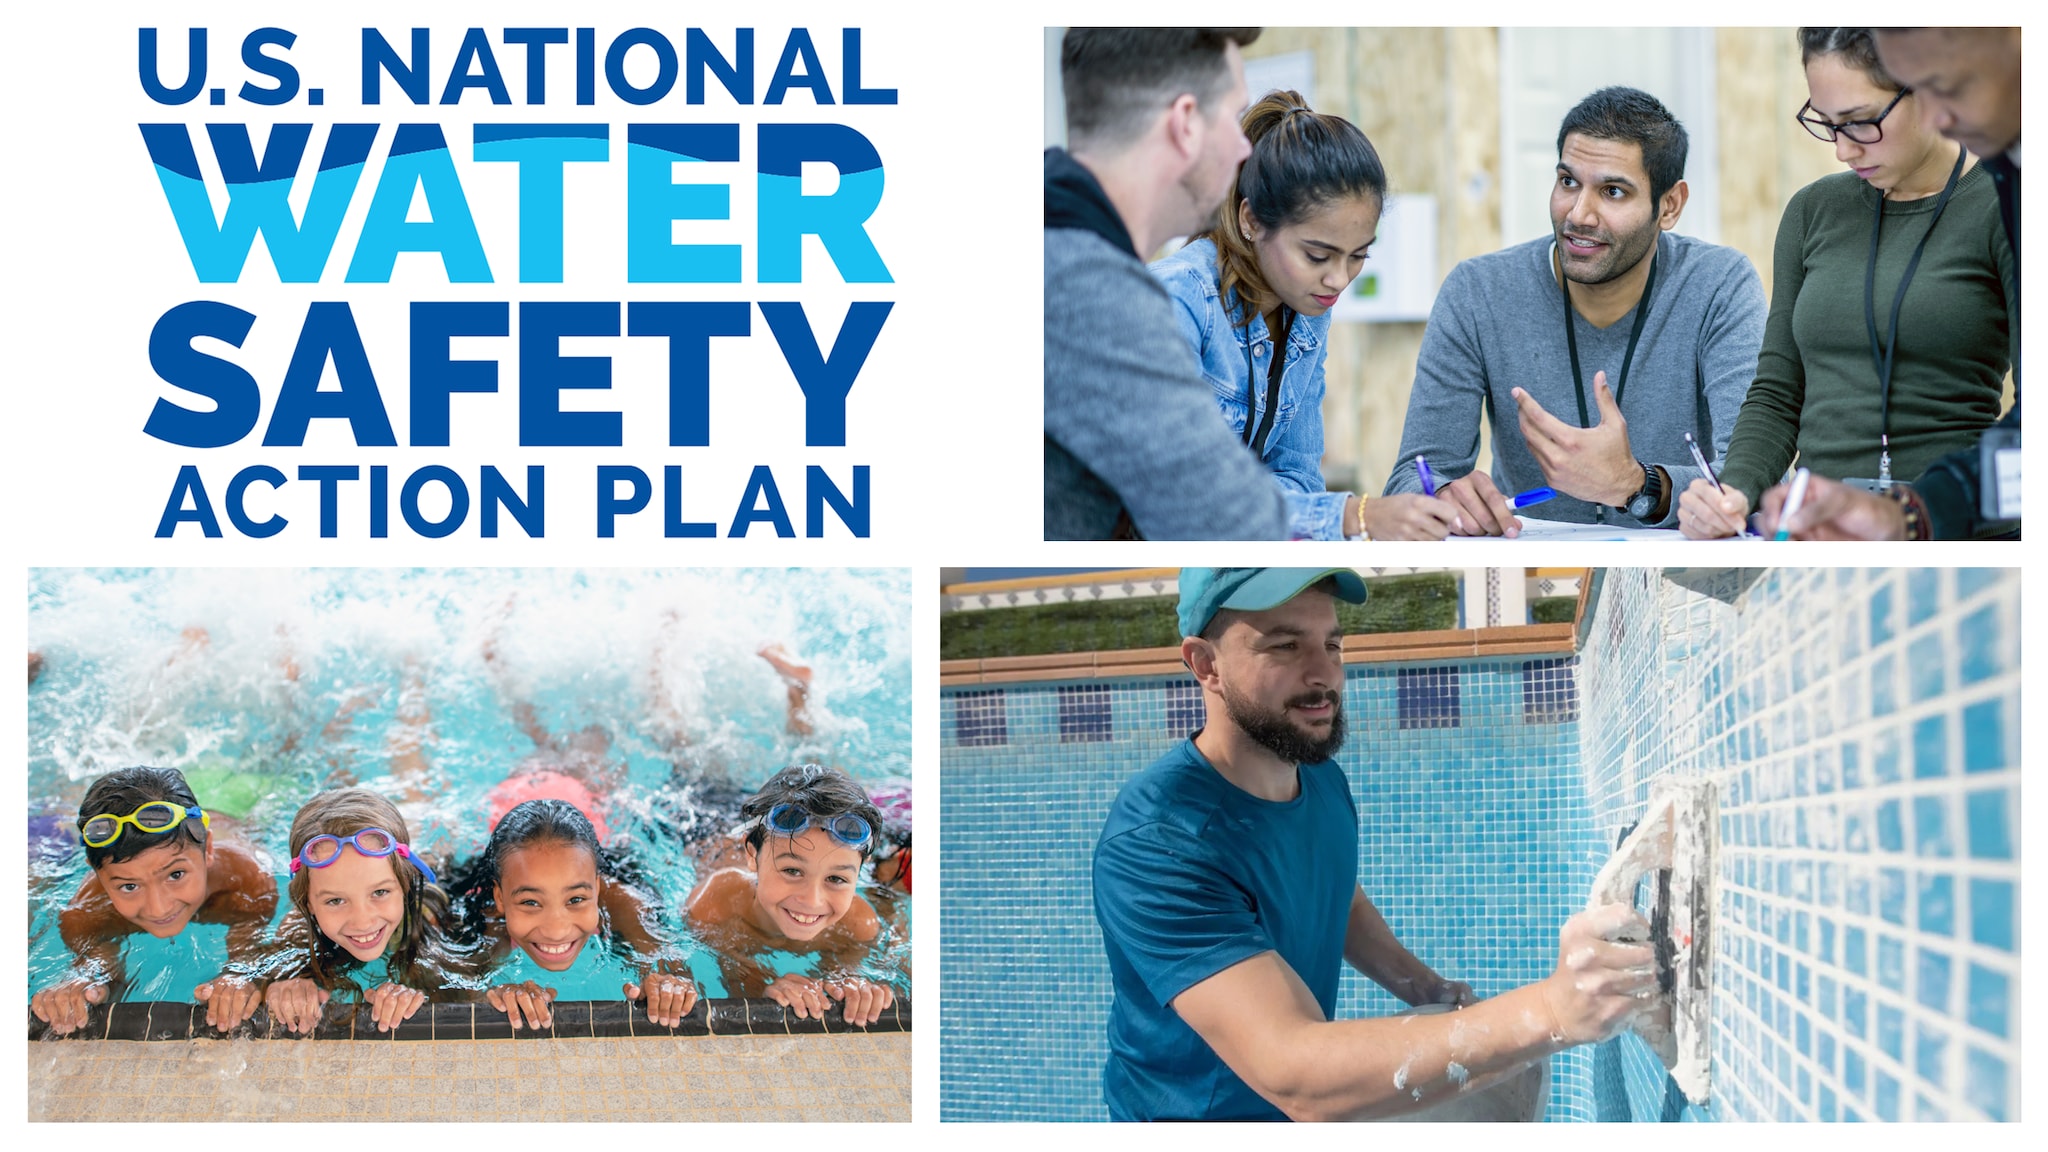 U.S. National Water Safety Action Plan collage